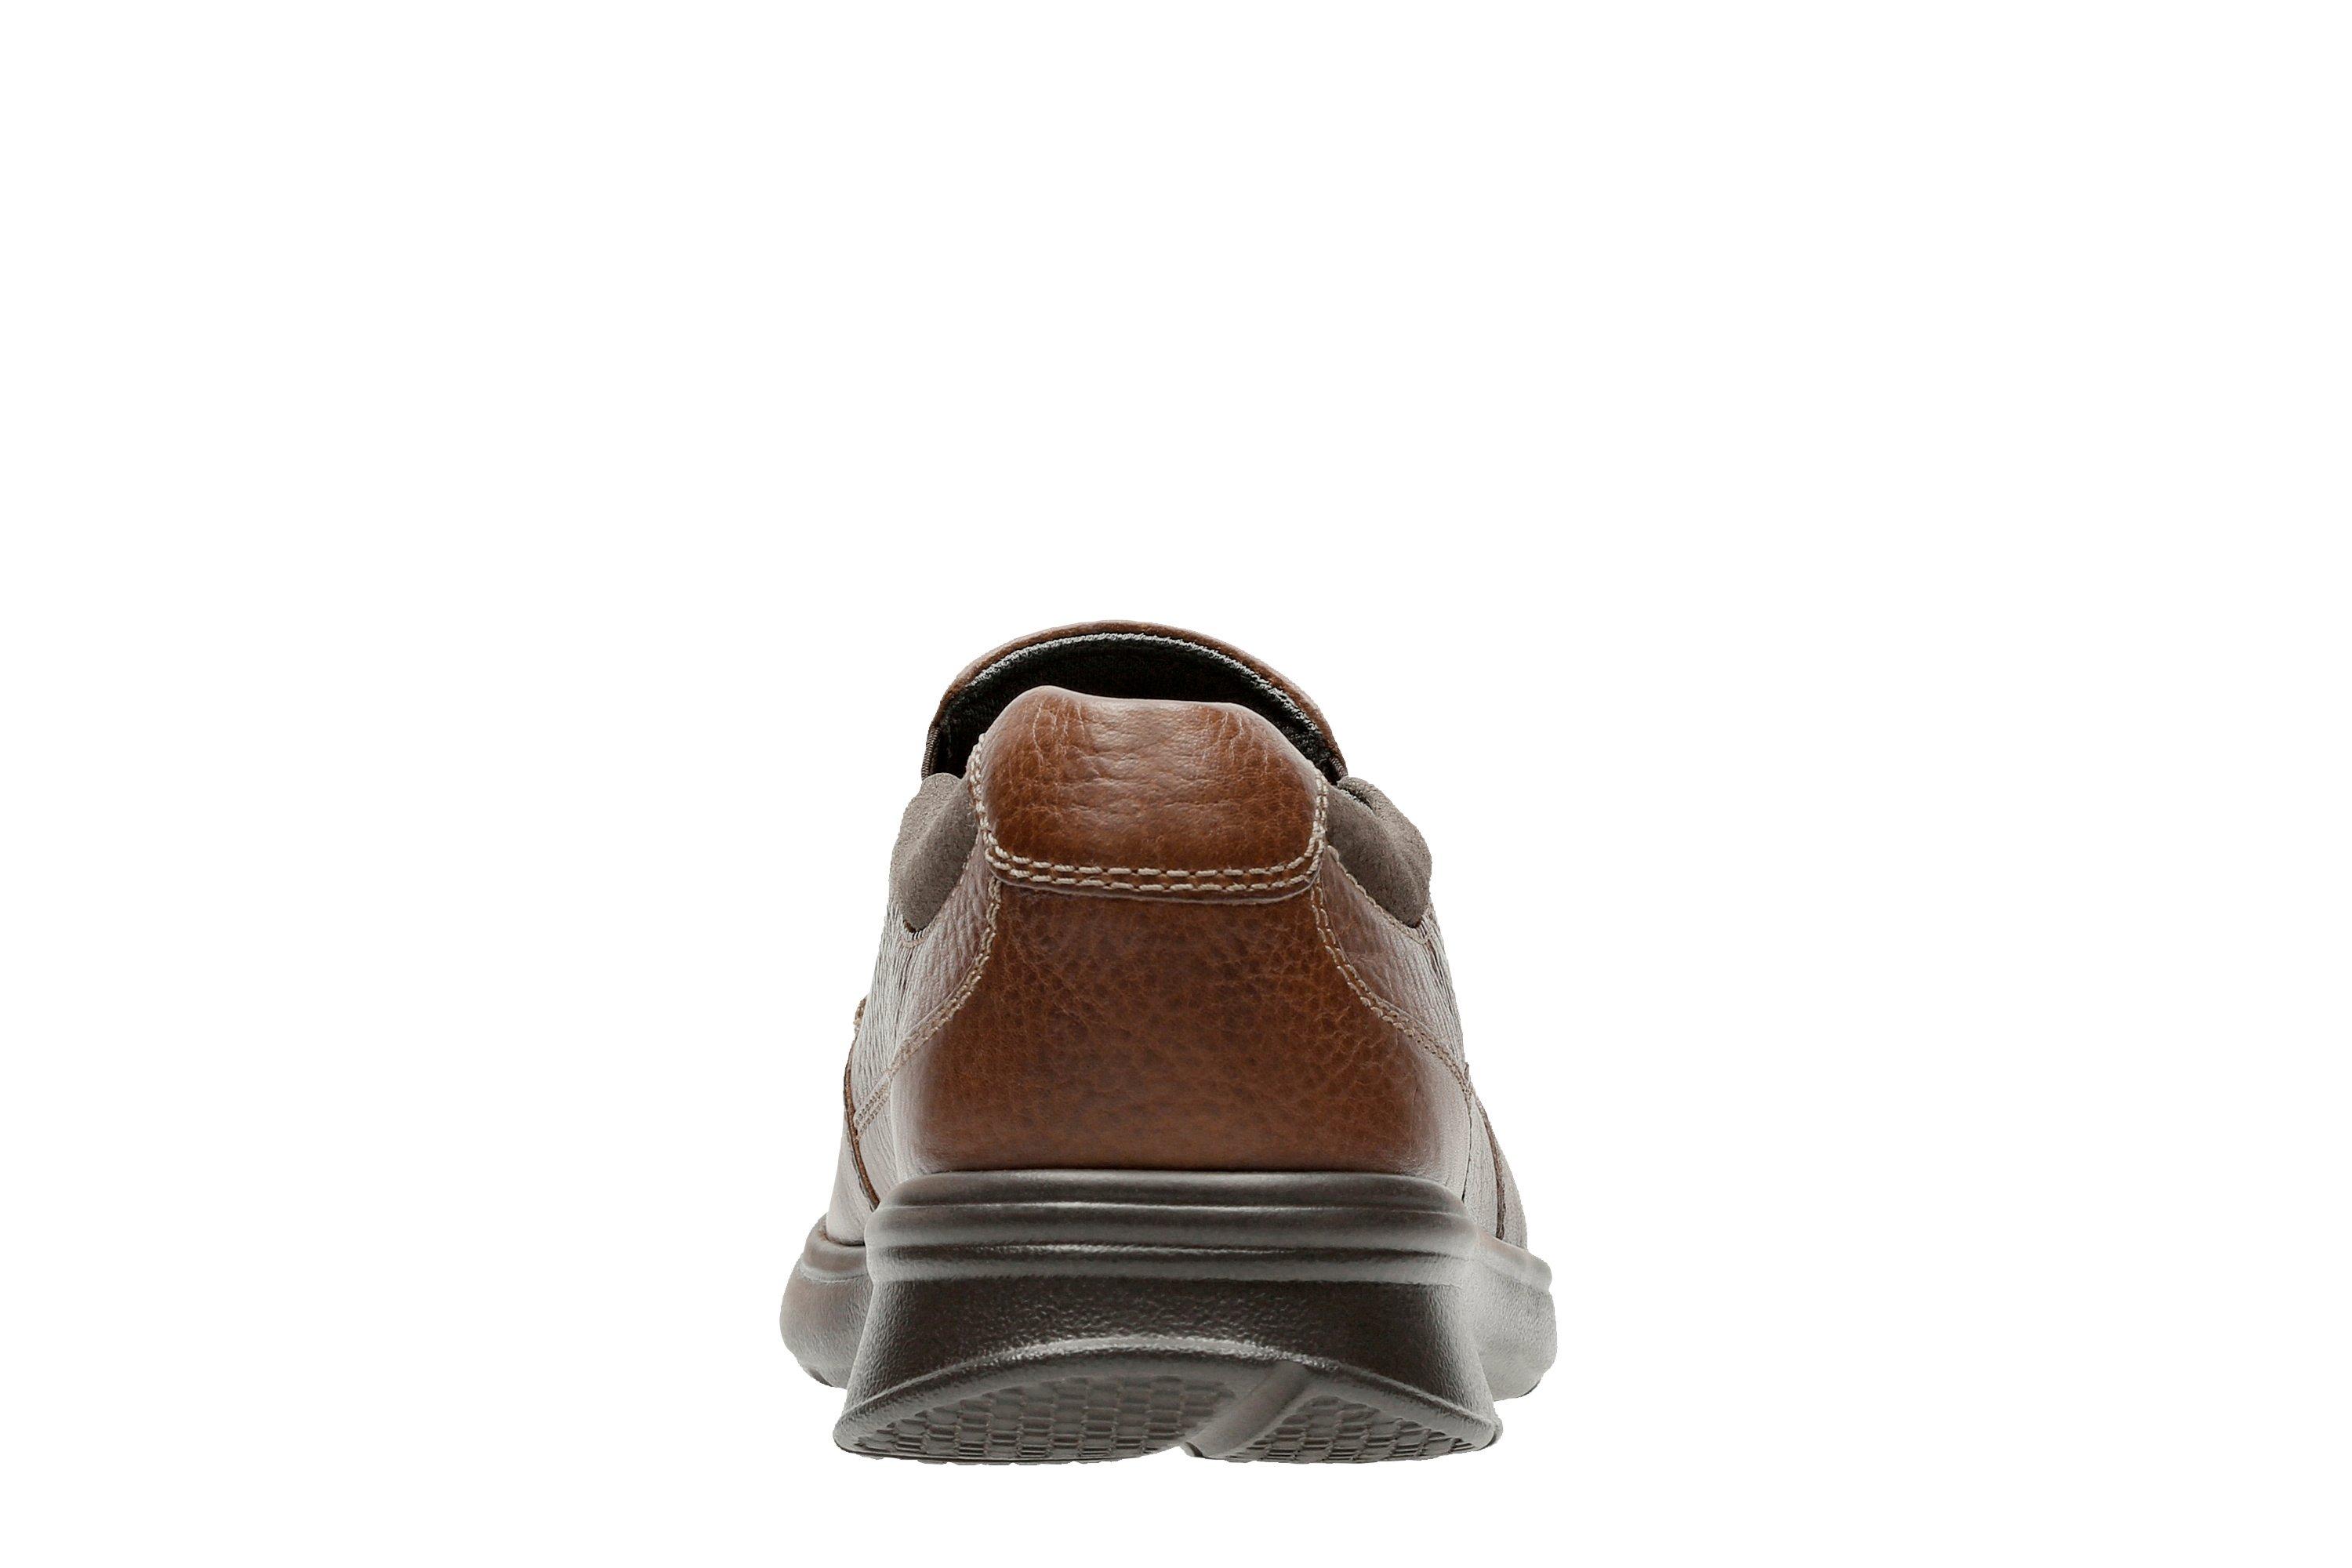 Pionero Panorama Perspectiva Men's Clarks Cotrell Free Slip-On Shoes | Shoe Carnival